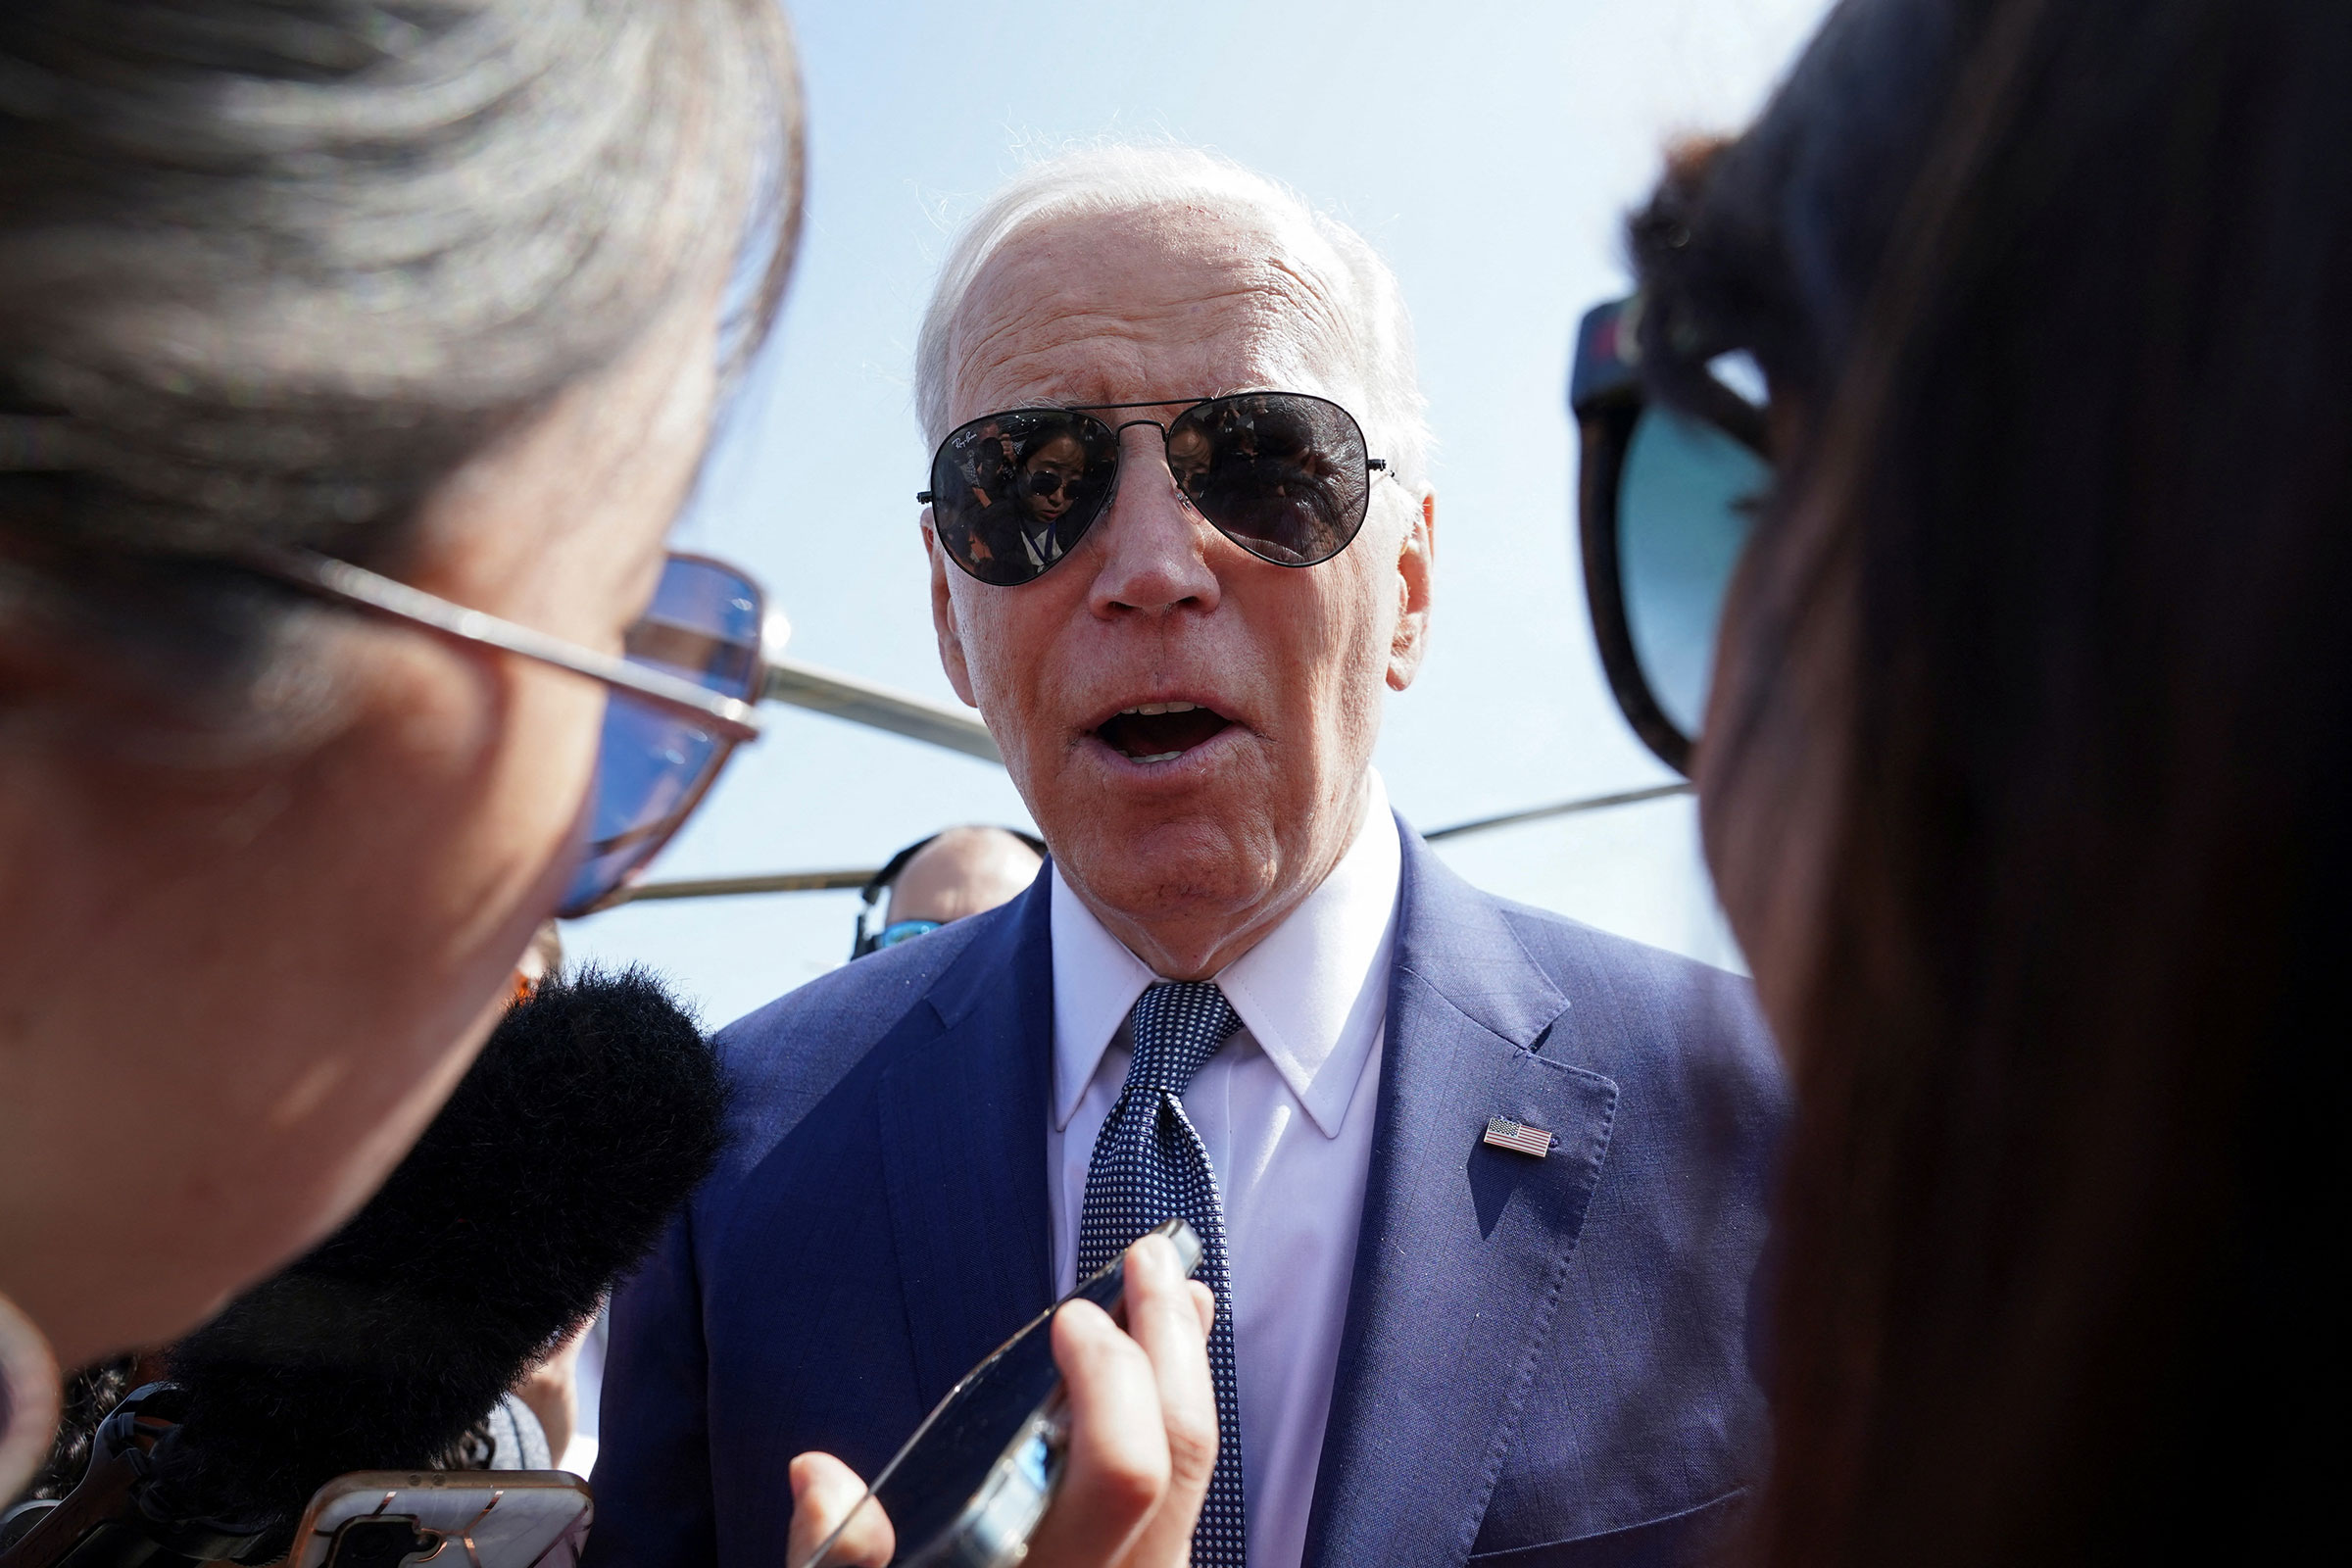 President Joe Biden talks to reporters after delivering remarks on the federal government's debt limit during a visit to SUNY Westchester Community College Valhalla as he departs Westchester Airport in White Plains, New York, on May 10.